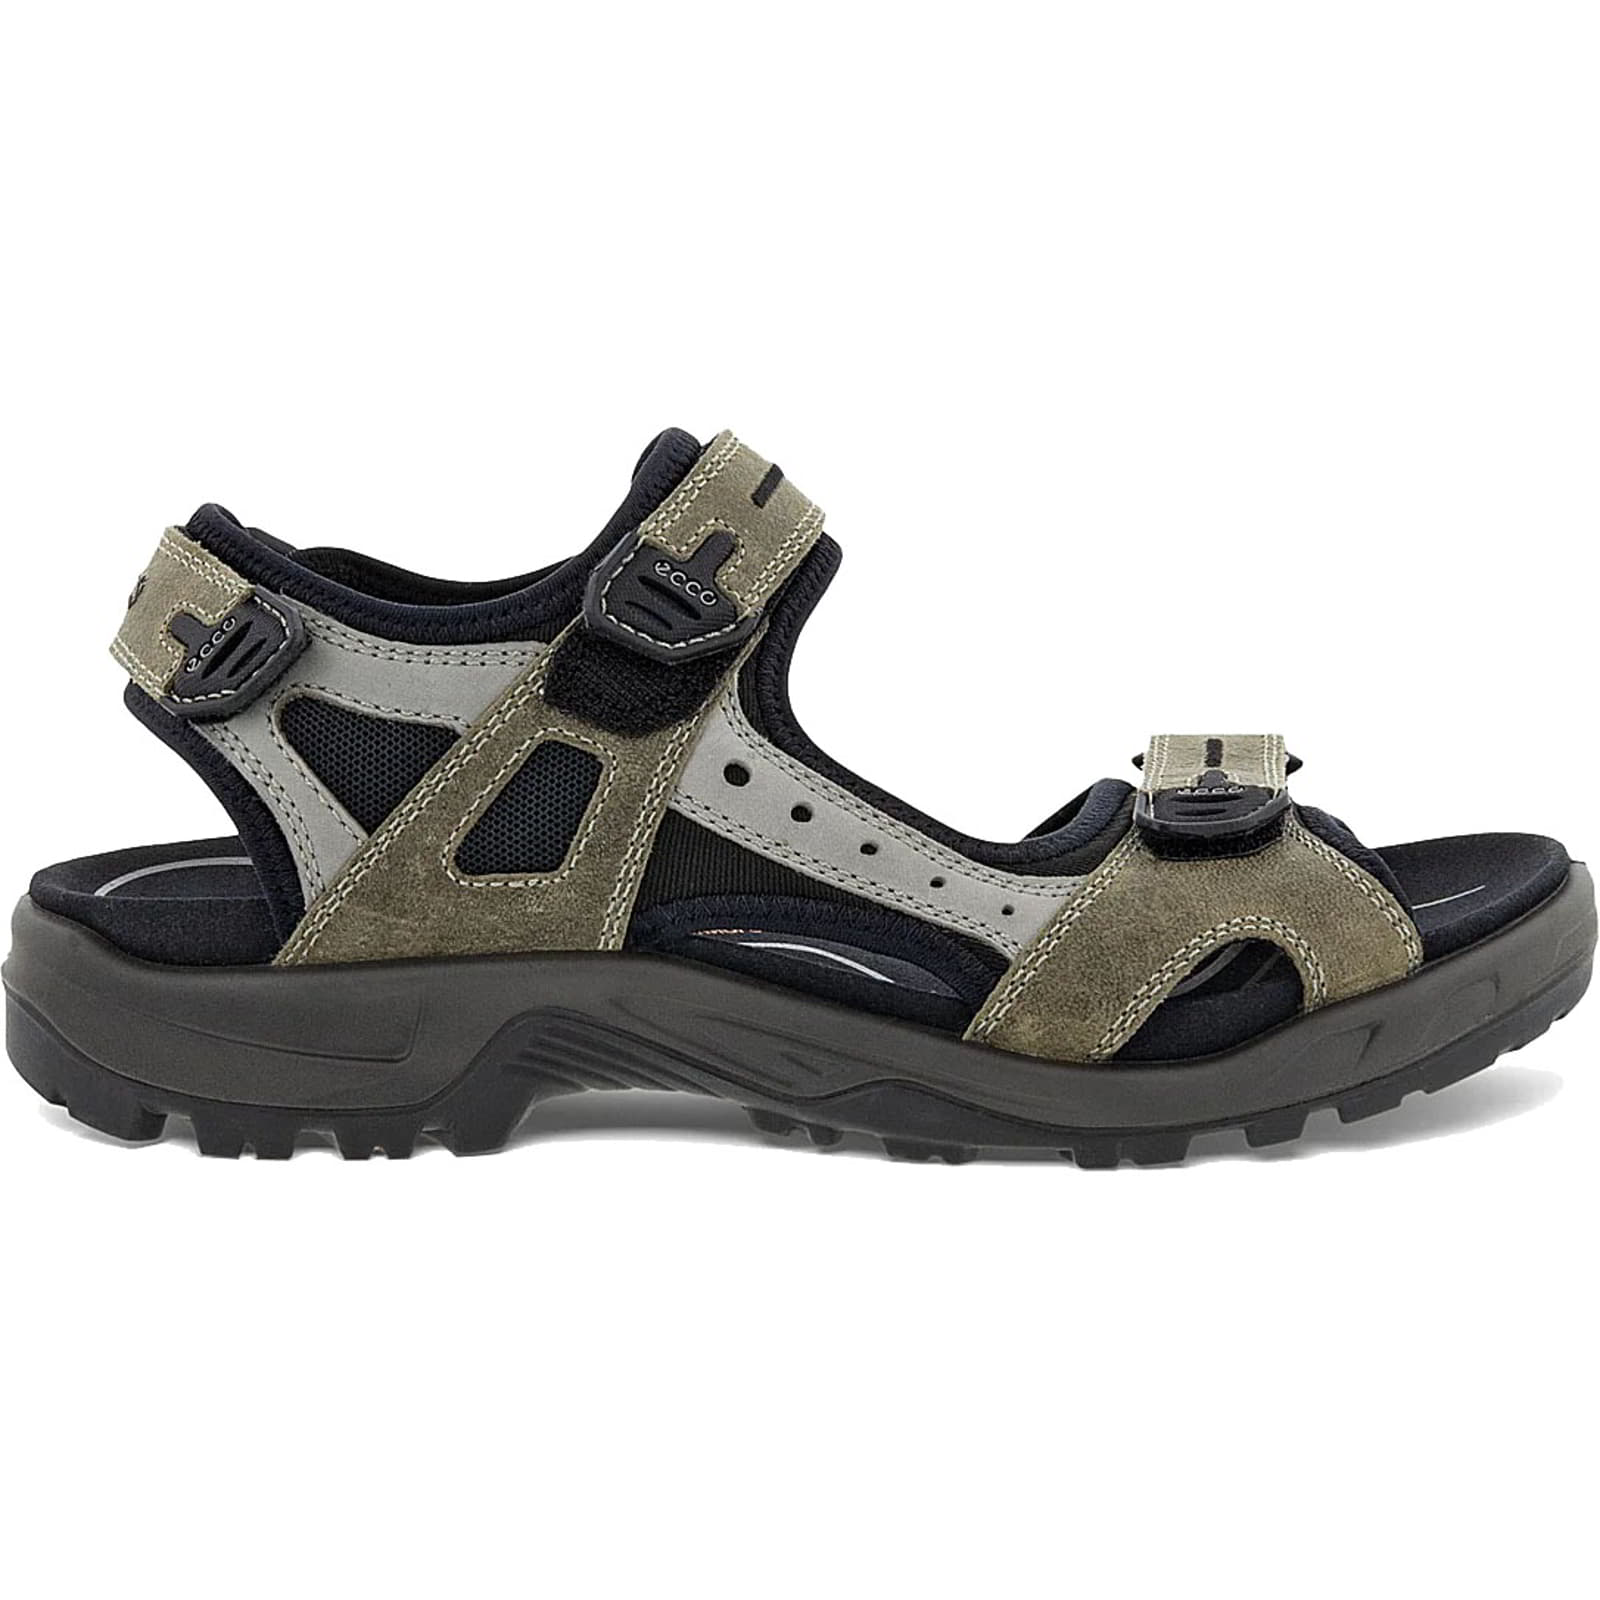 Ecco Shoes Mens Offroad Leather Walking Sandals - UK 12/12.5 / EU 47 Brown 2951